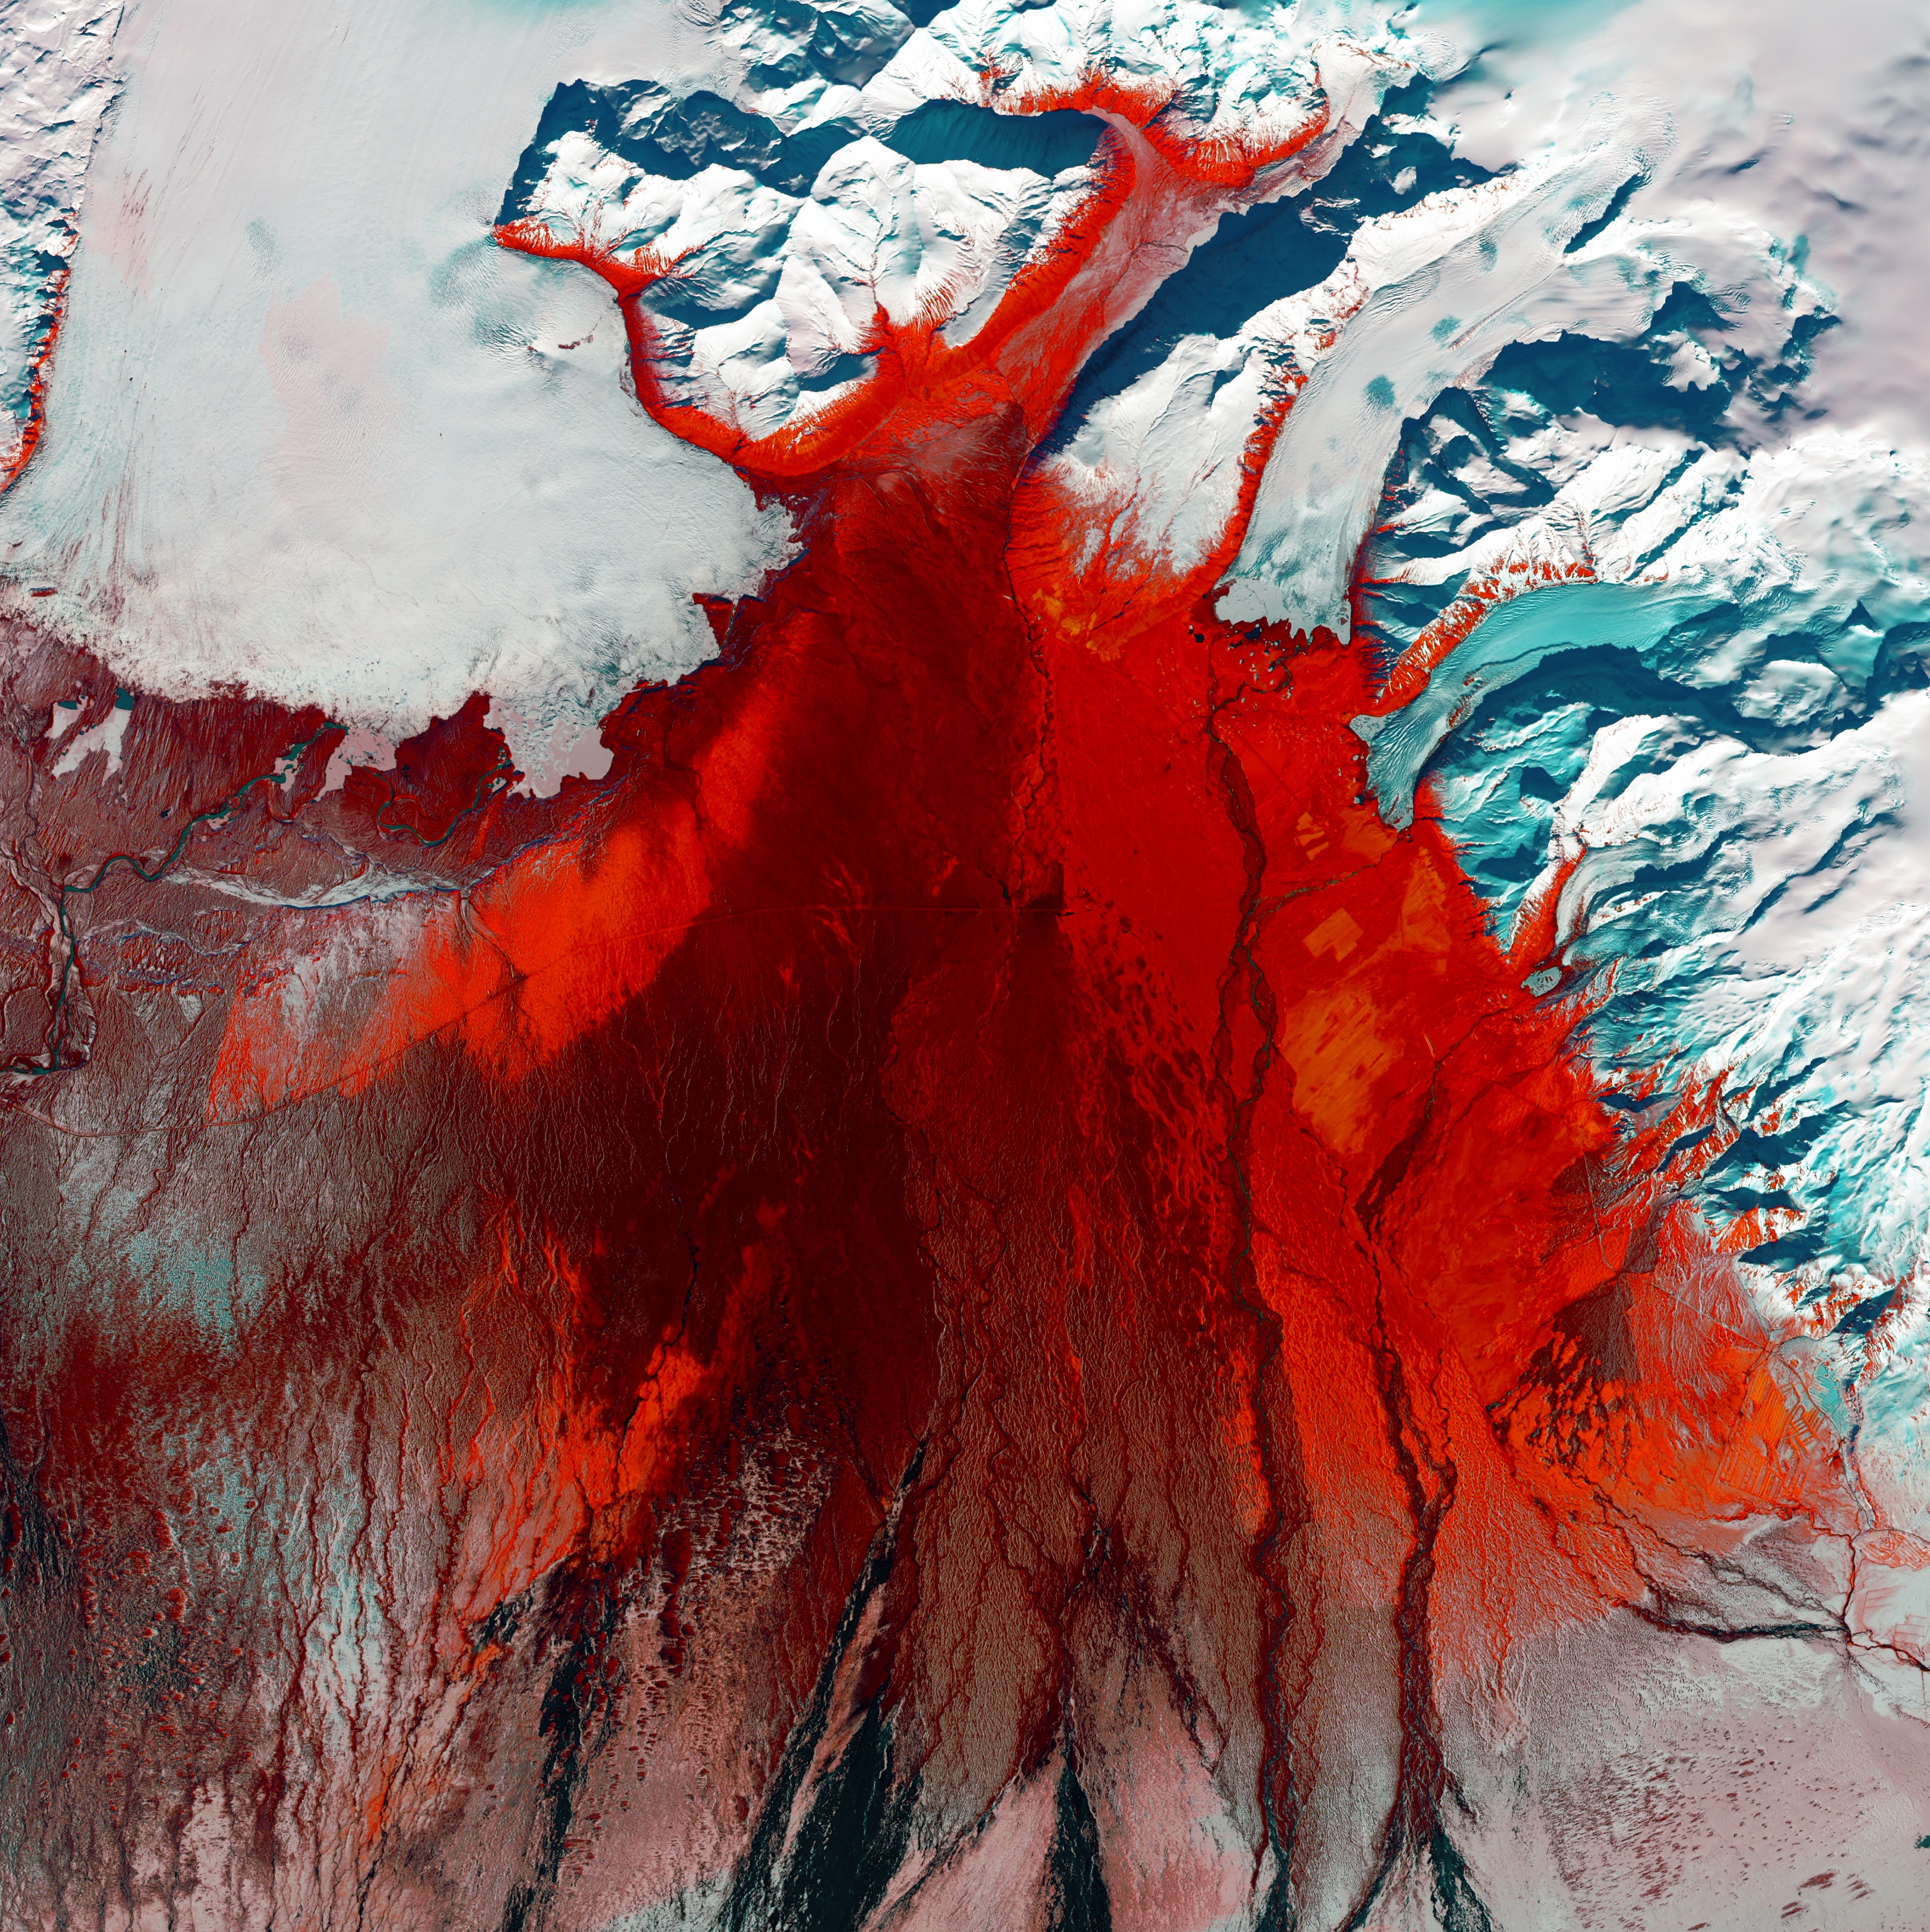 glacier, view from above, nature, ice, red, relief